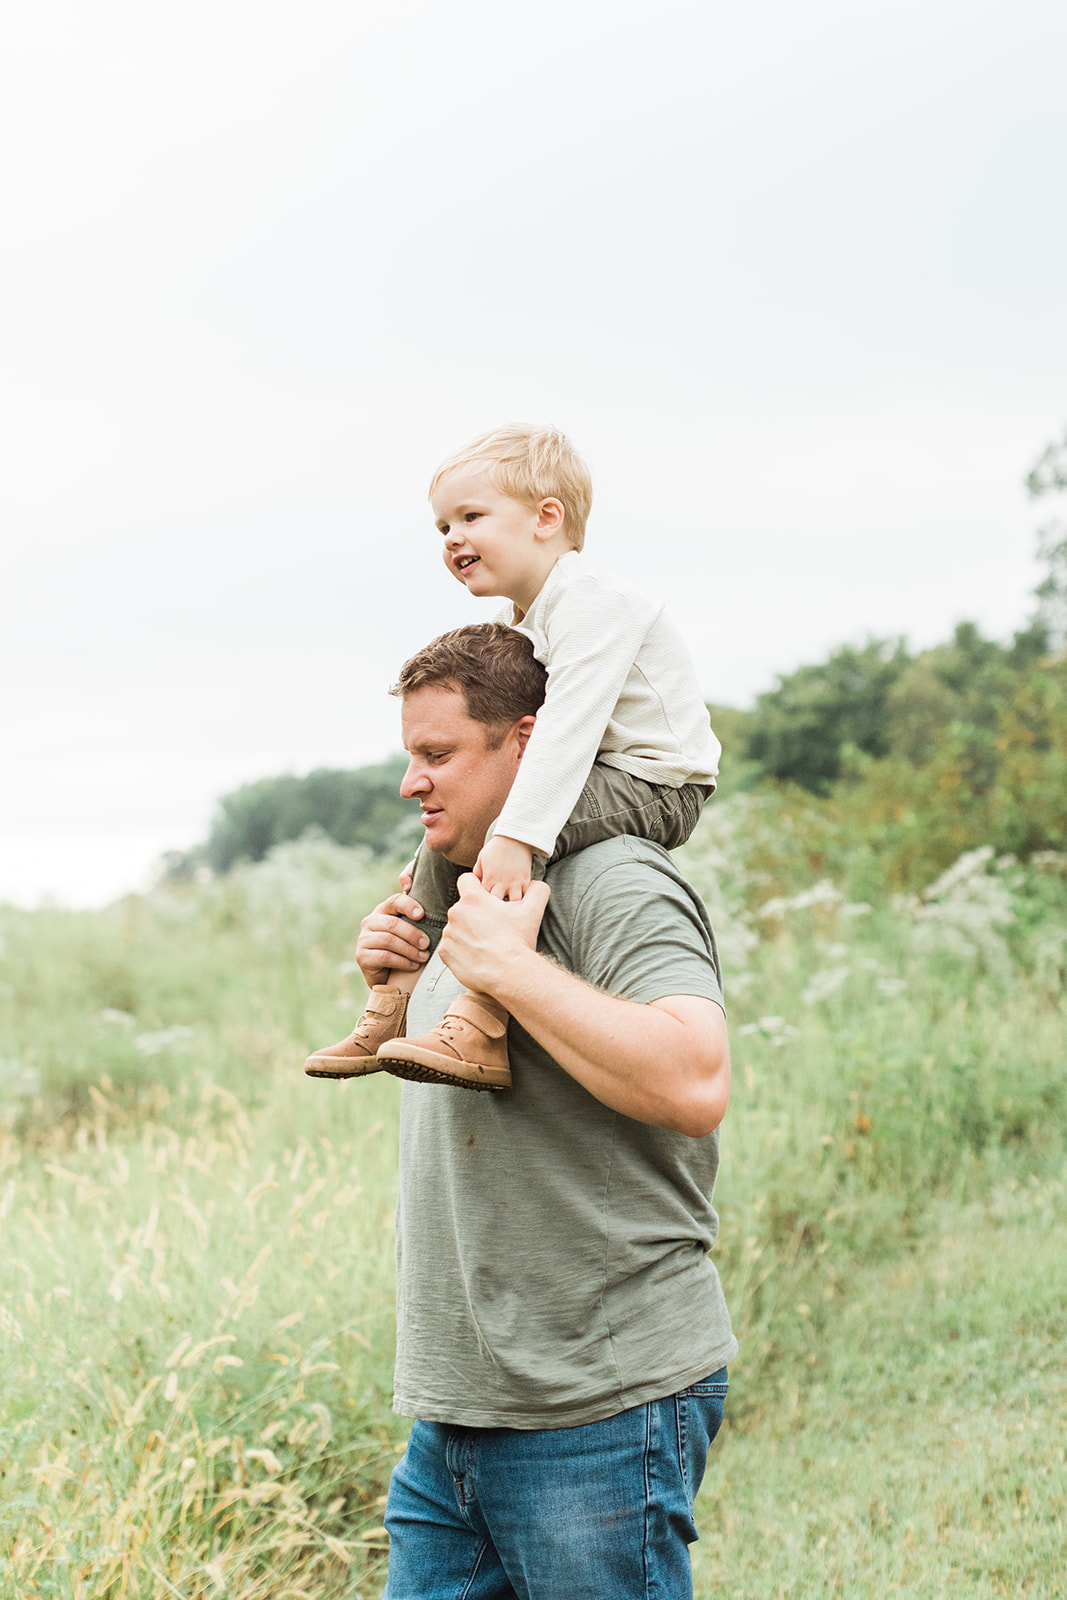 outdoor family session in nashville tennessee. dad and son photo